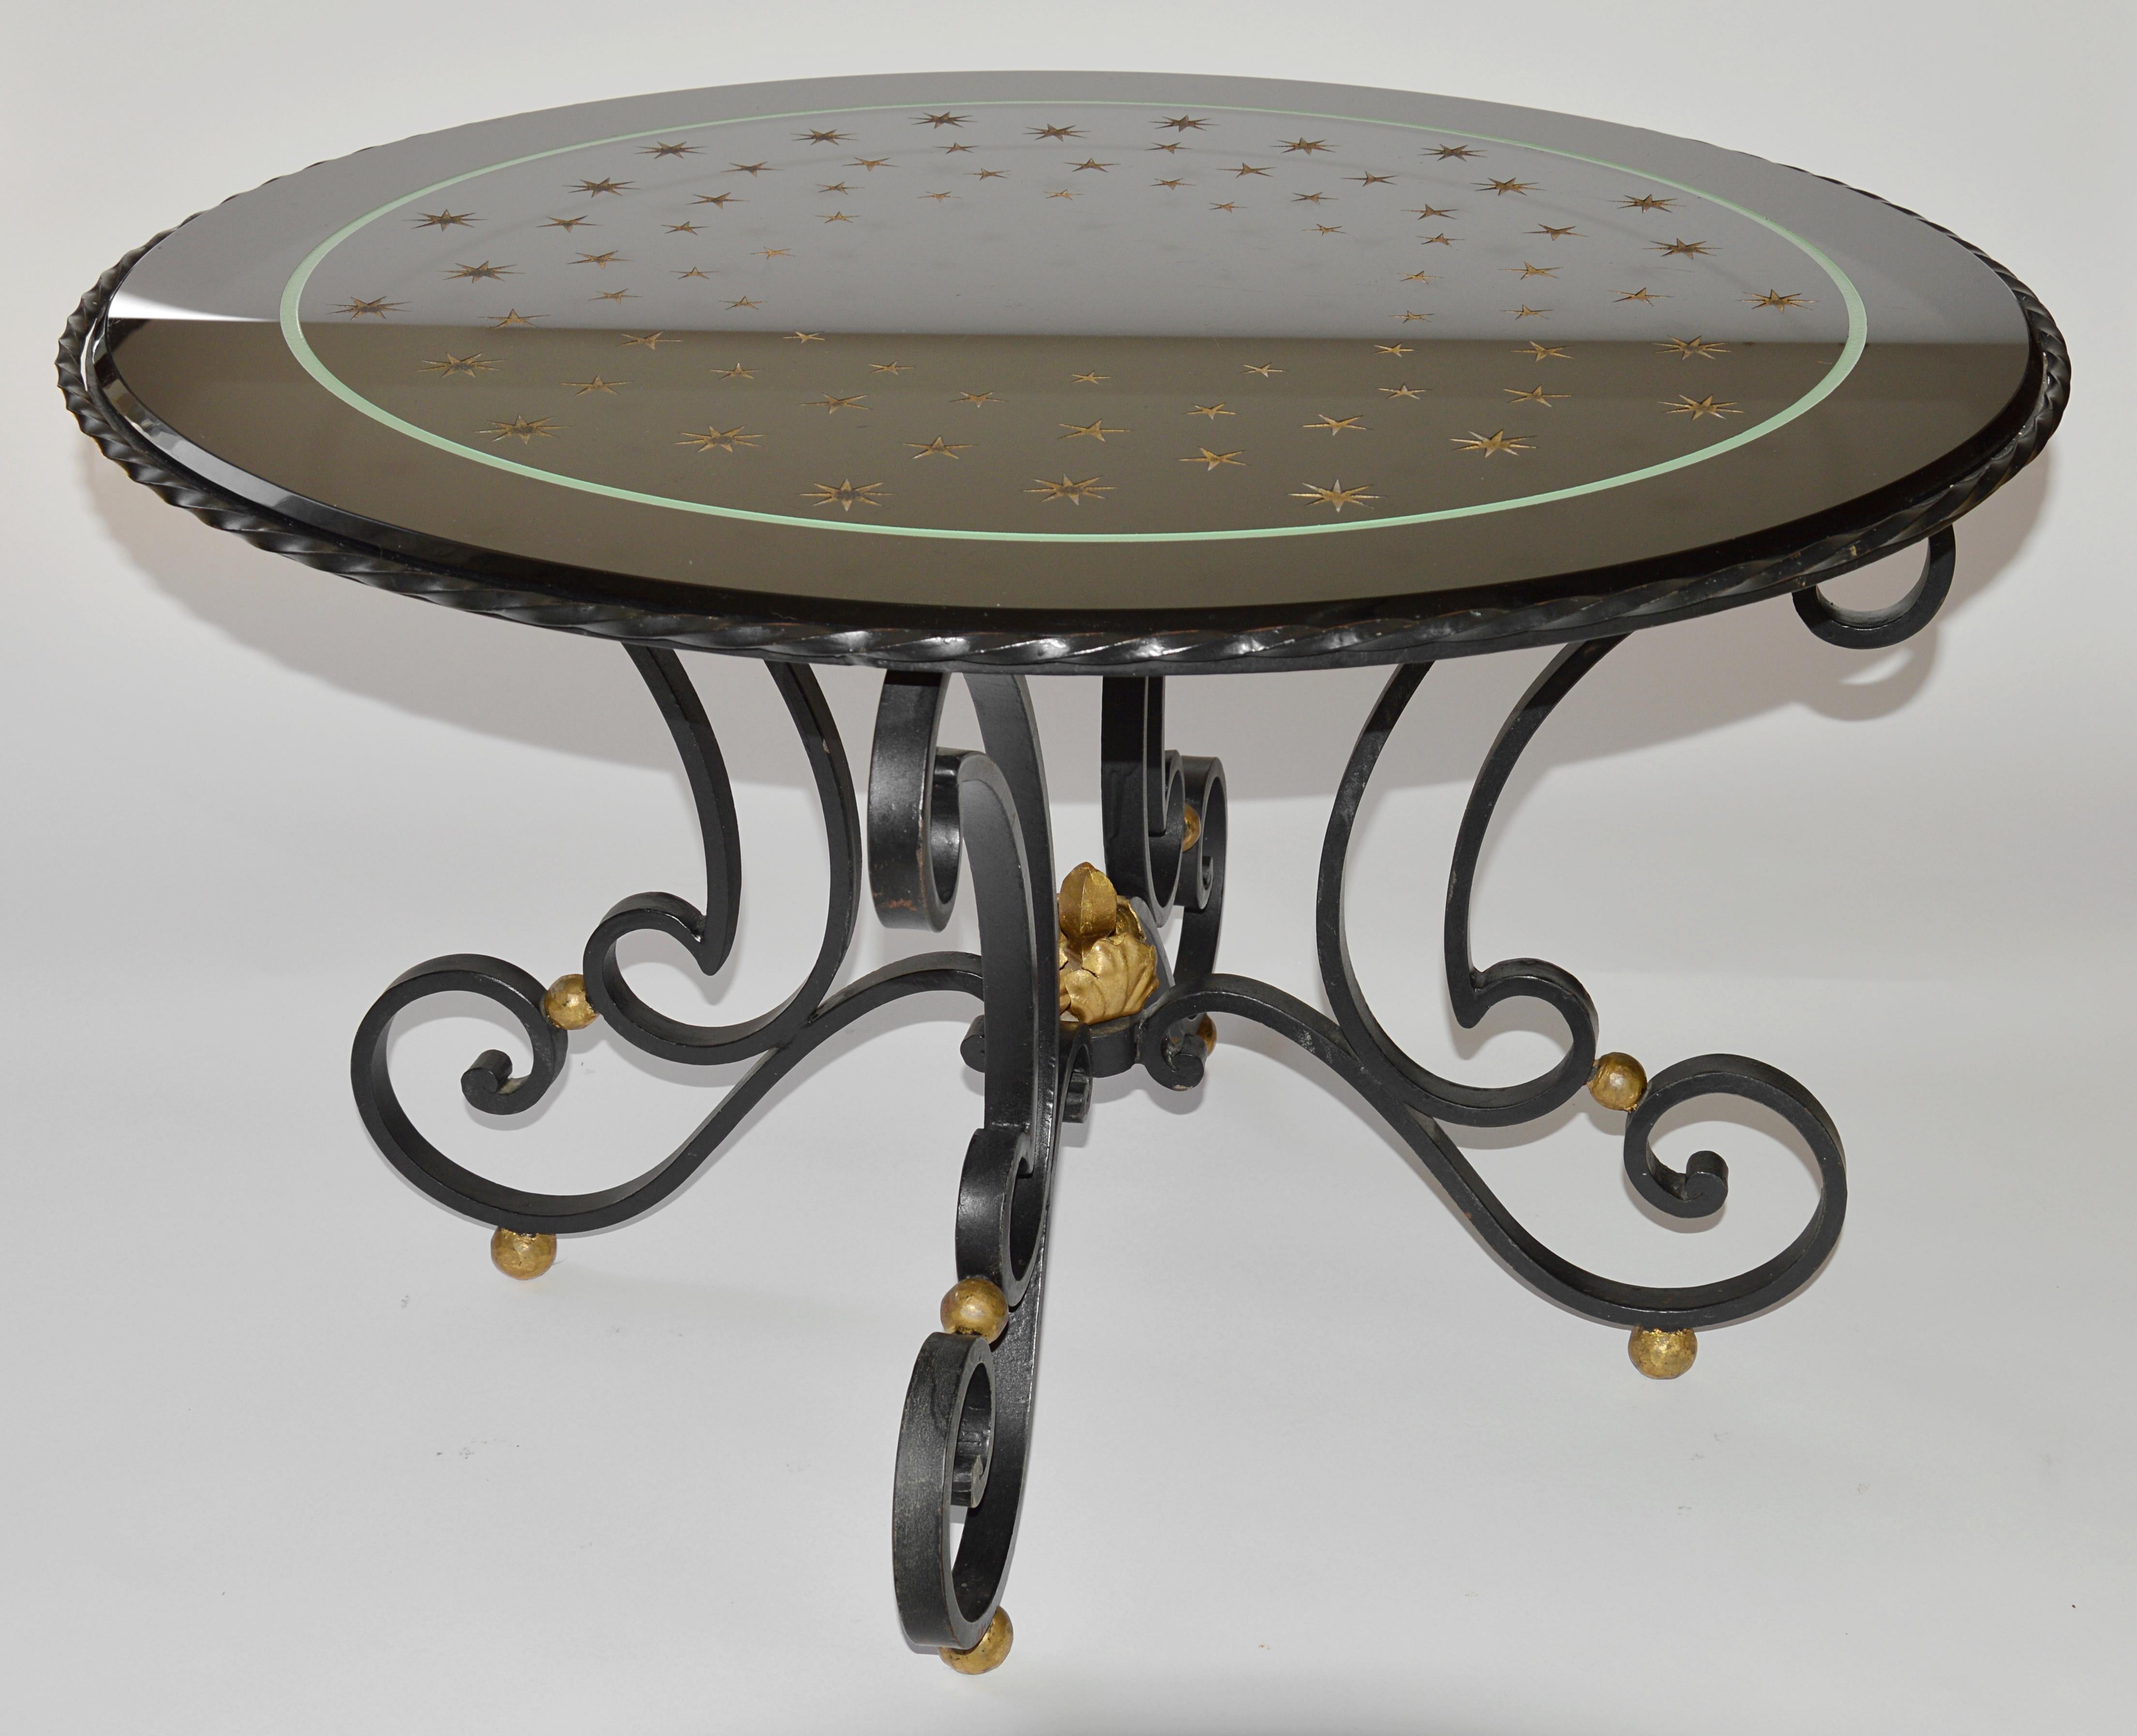 French Art Deco Wrought-Iron & Etched Glass Milky Way Coffee Table, Late 1930s In Good Condition For Sale In Saint-Amans-des-Cots, FR